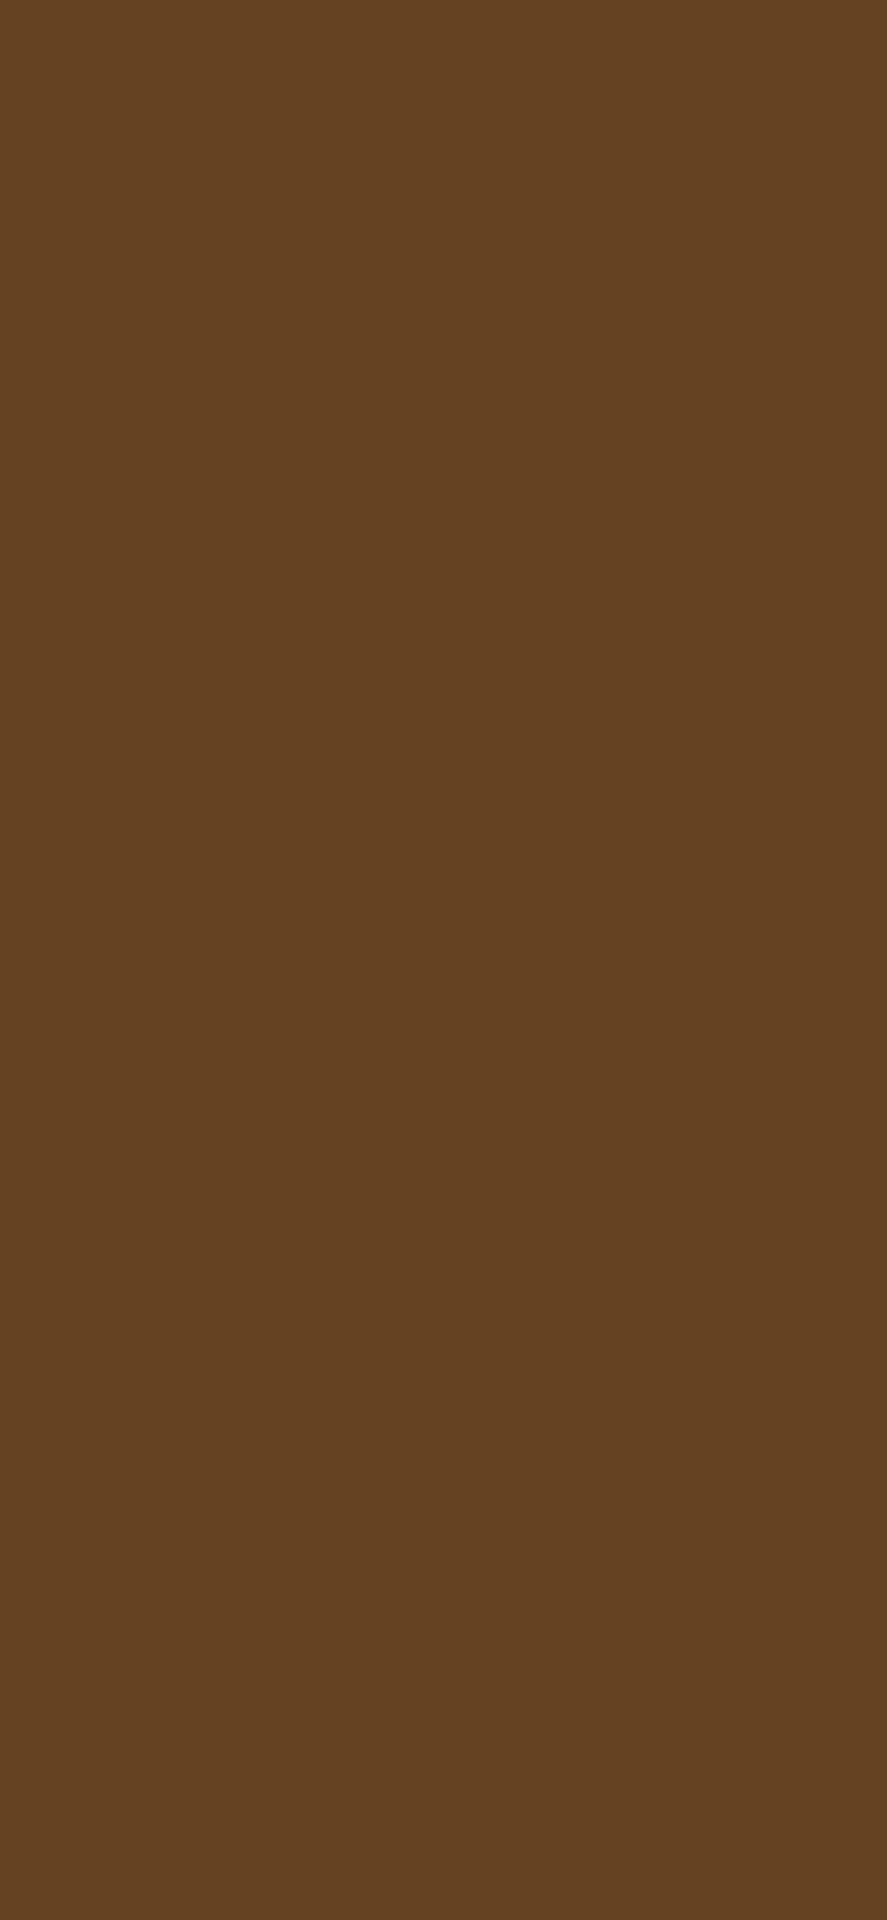 Otter Brown Solid Color Background